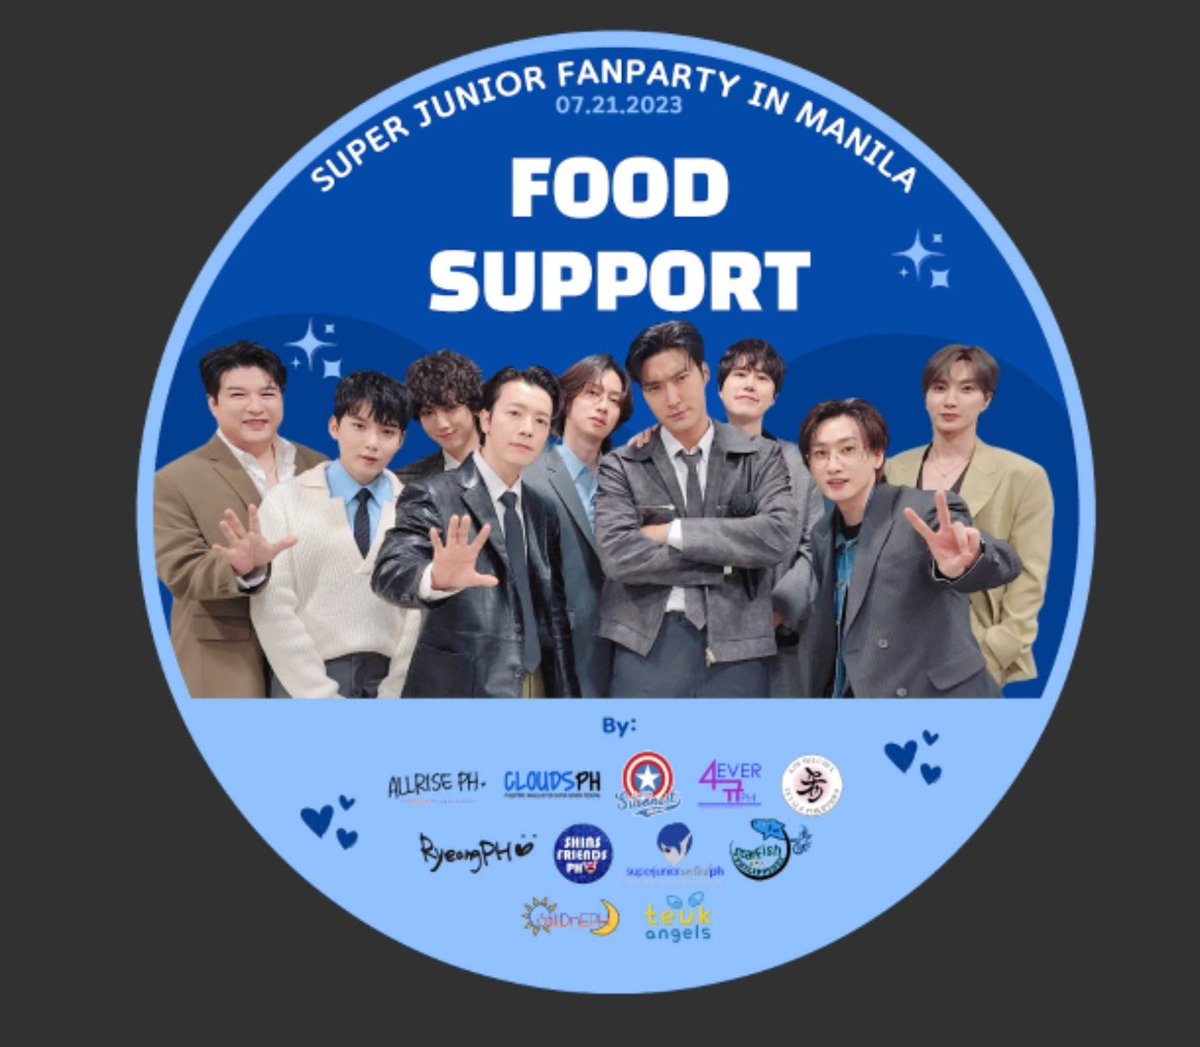 2023 SJ Fan Party in Manila Food Support Project PROOF 💙 We have provided 40 fruit cups & 18 Fruit Milks for the members and their staff last July 21, 2023 🙏 Thank you so much our lovely @9ryeong9 for always appreciating our hard work & efforts 🥹 #SJ_FANPARTY #SJinMNL